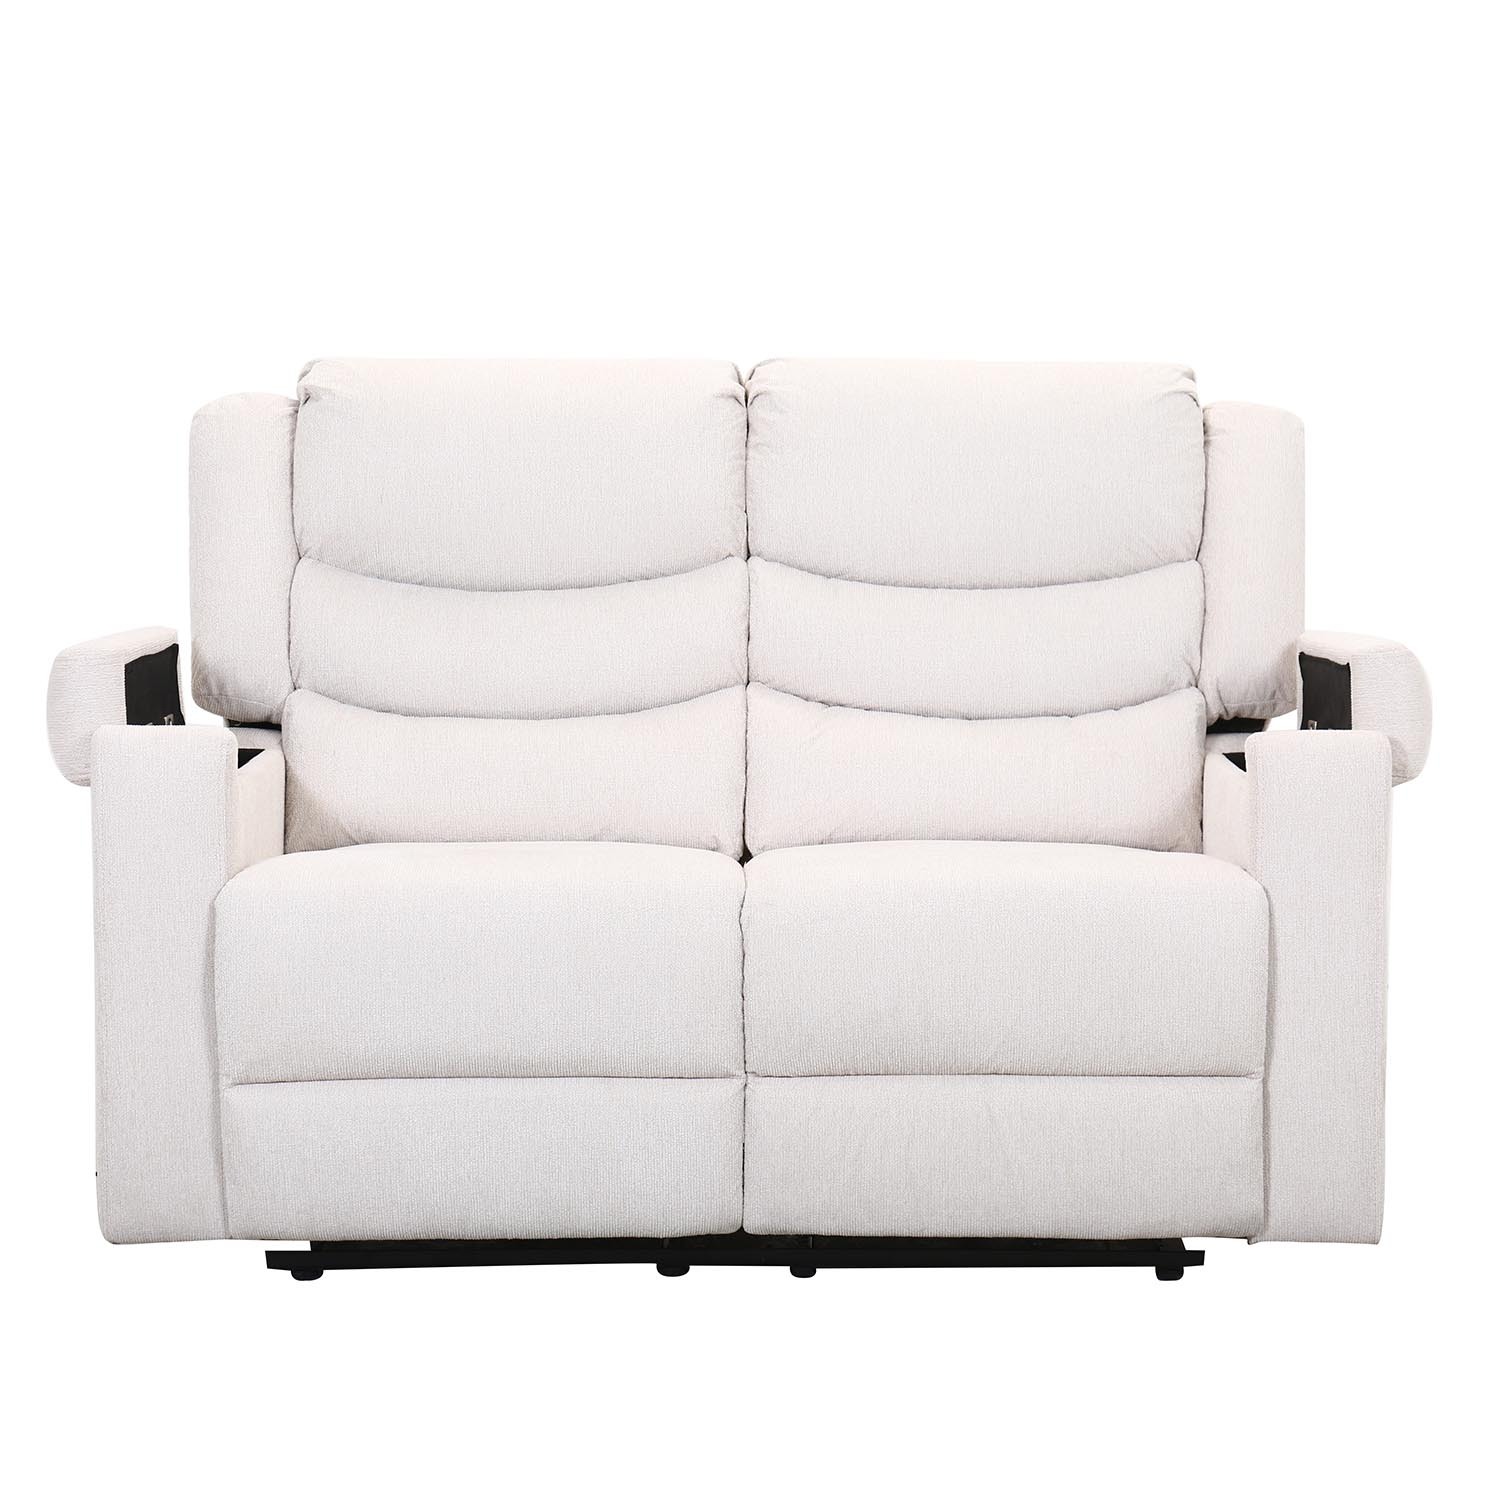 Heritage 2 Seater Ivory Recliner Sofa Image 3